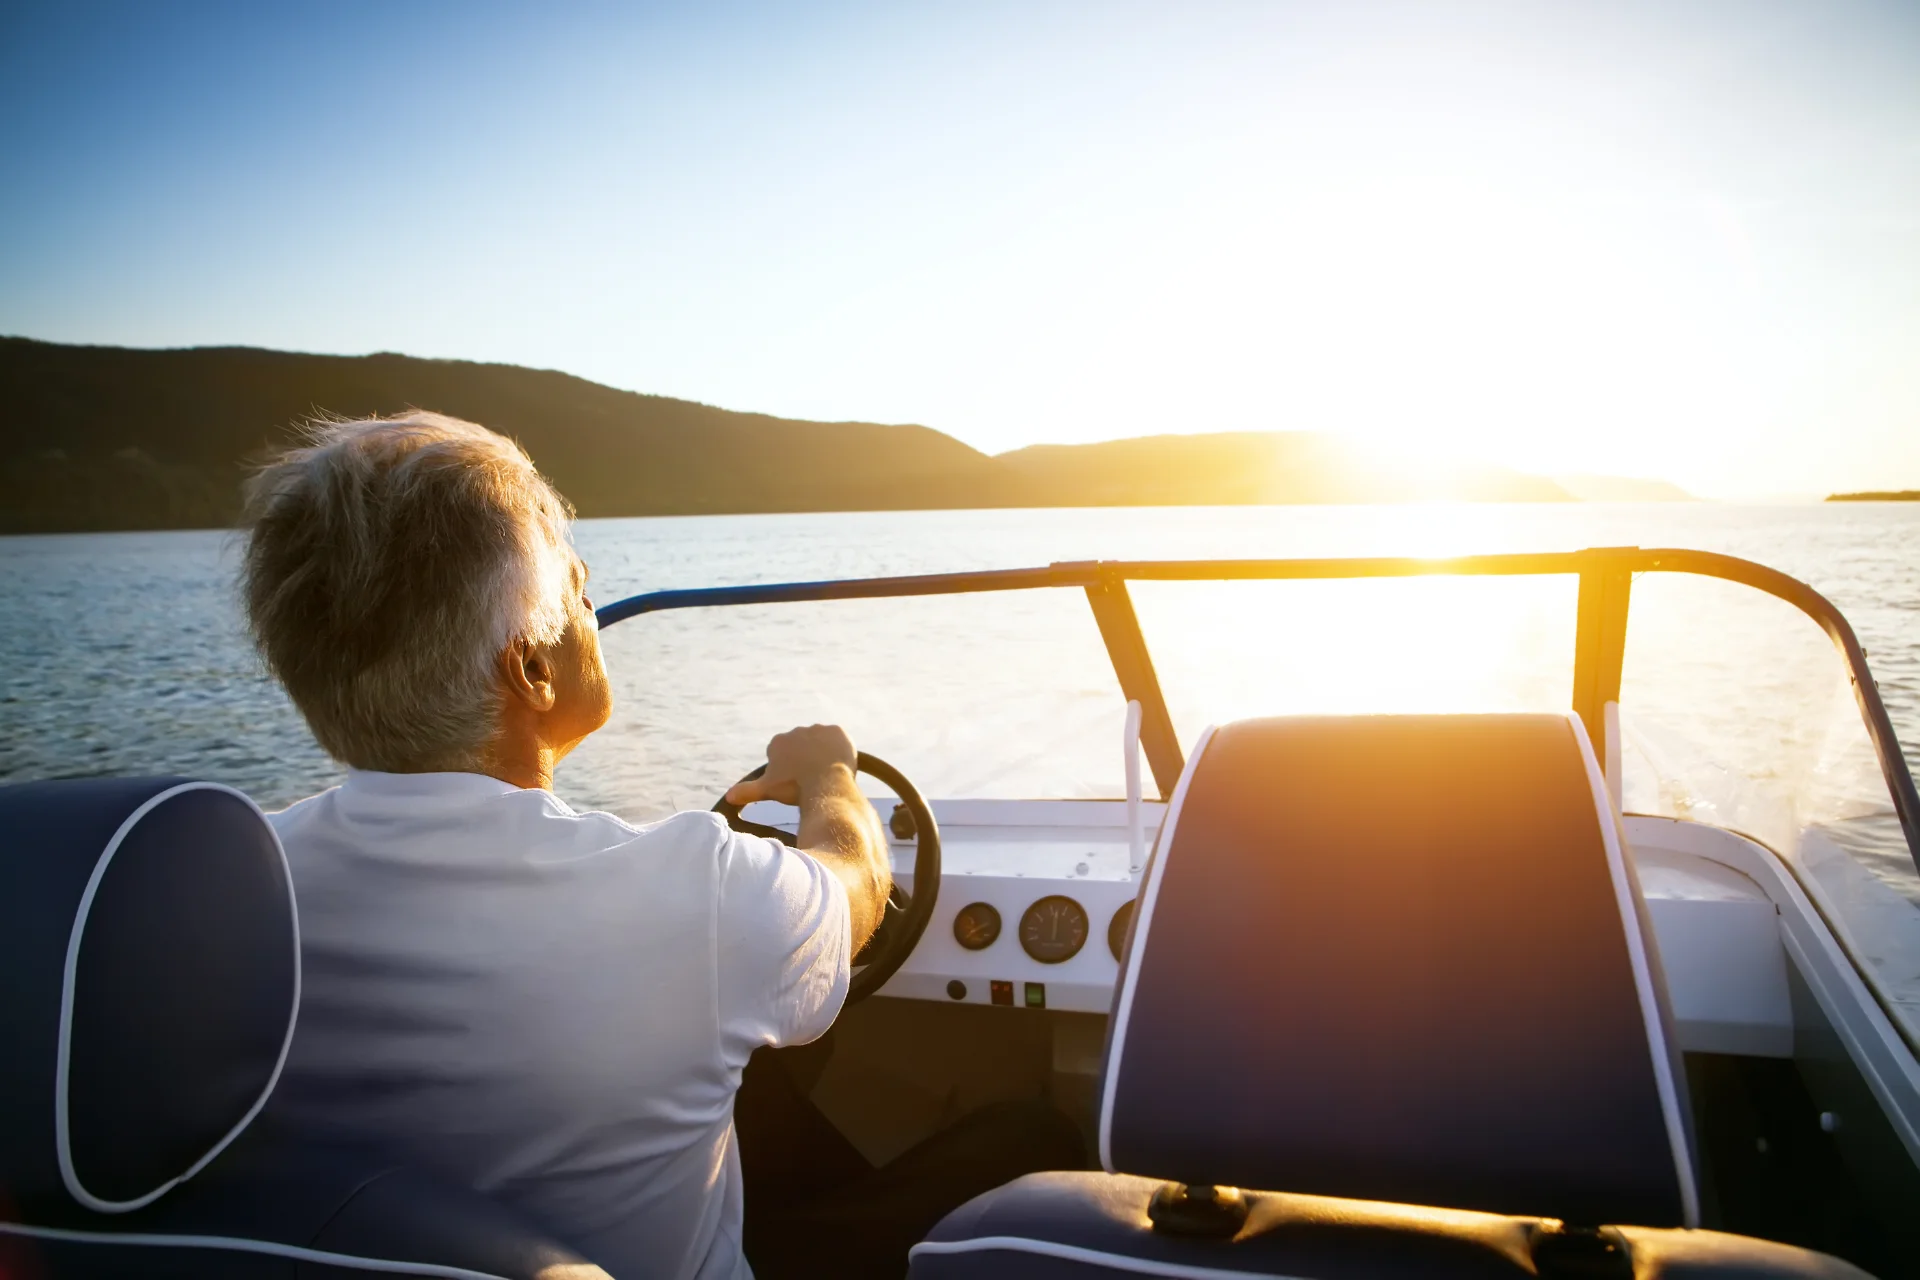 Man driving boat into sunset peacefully